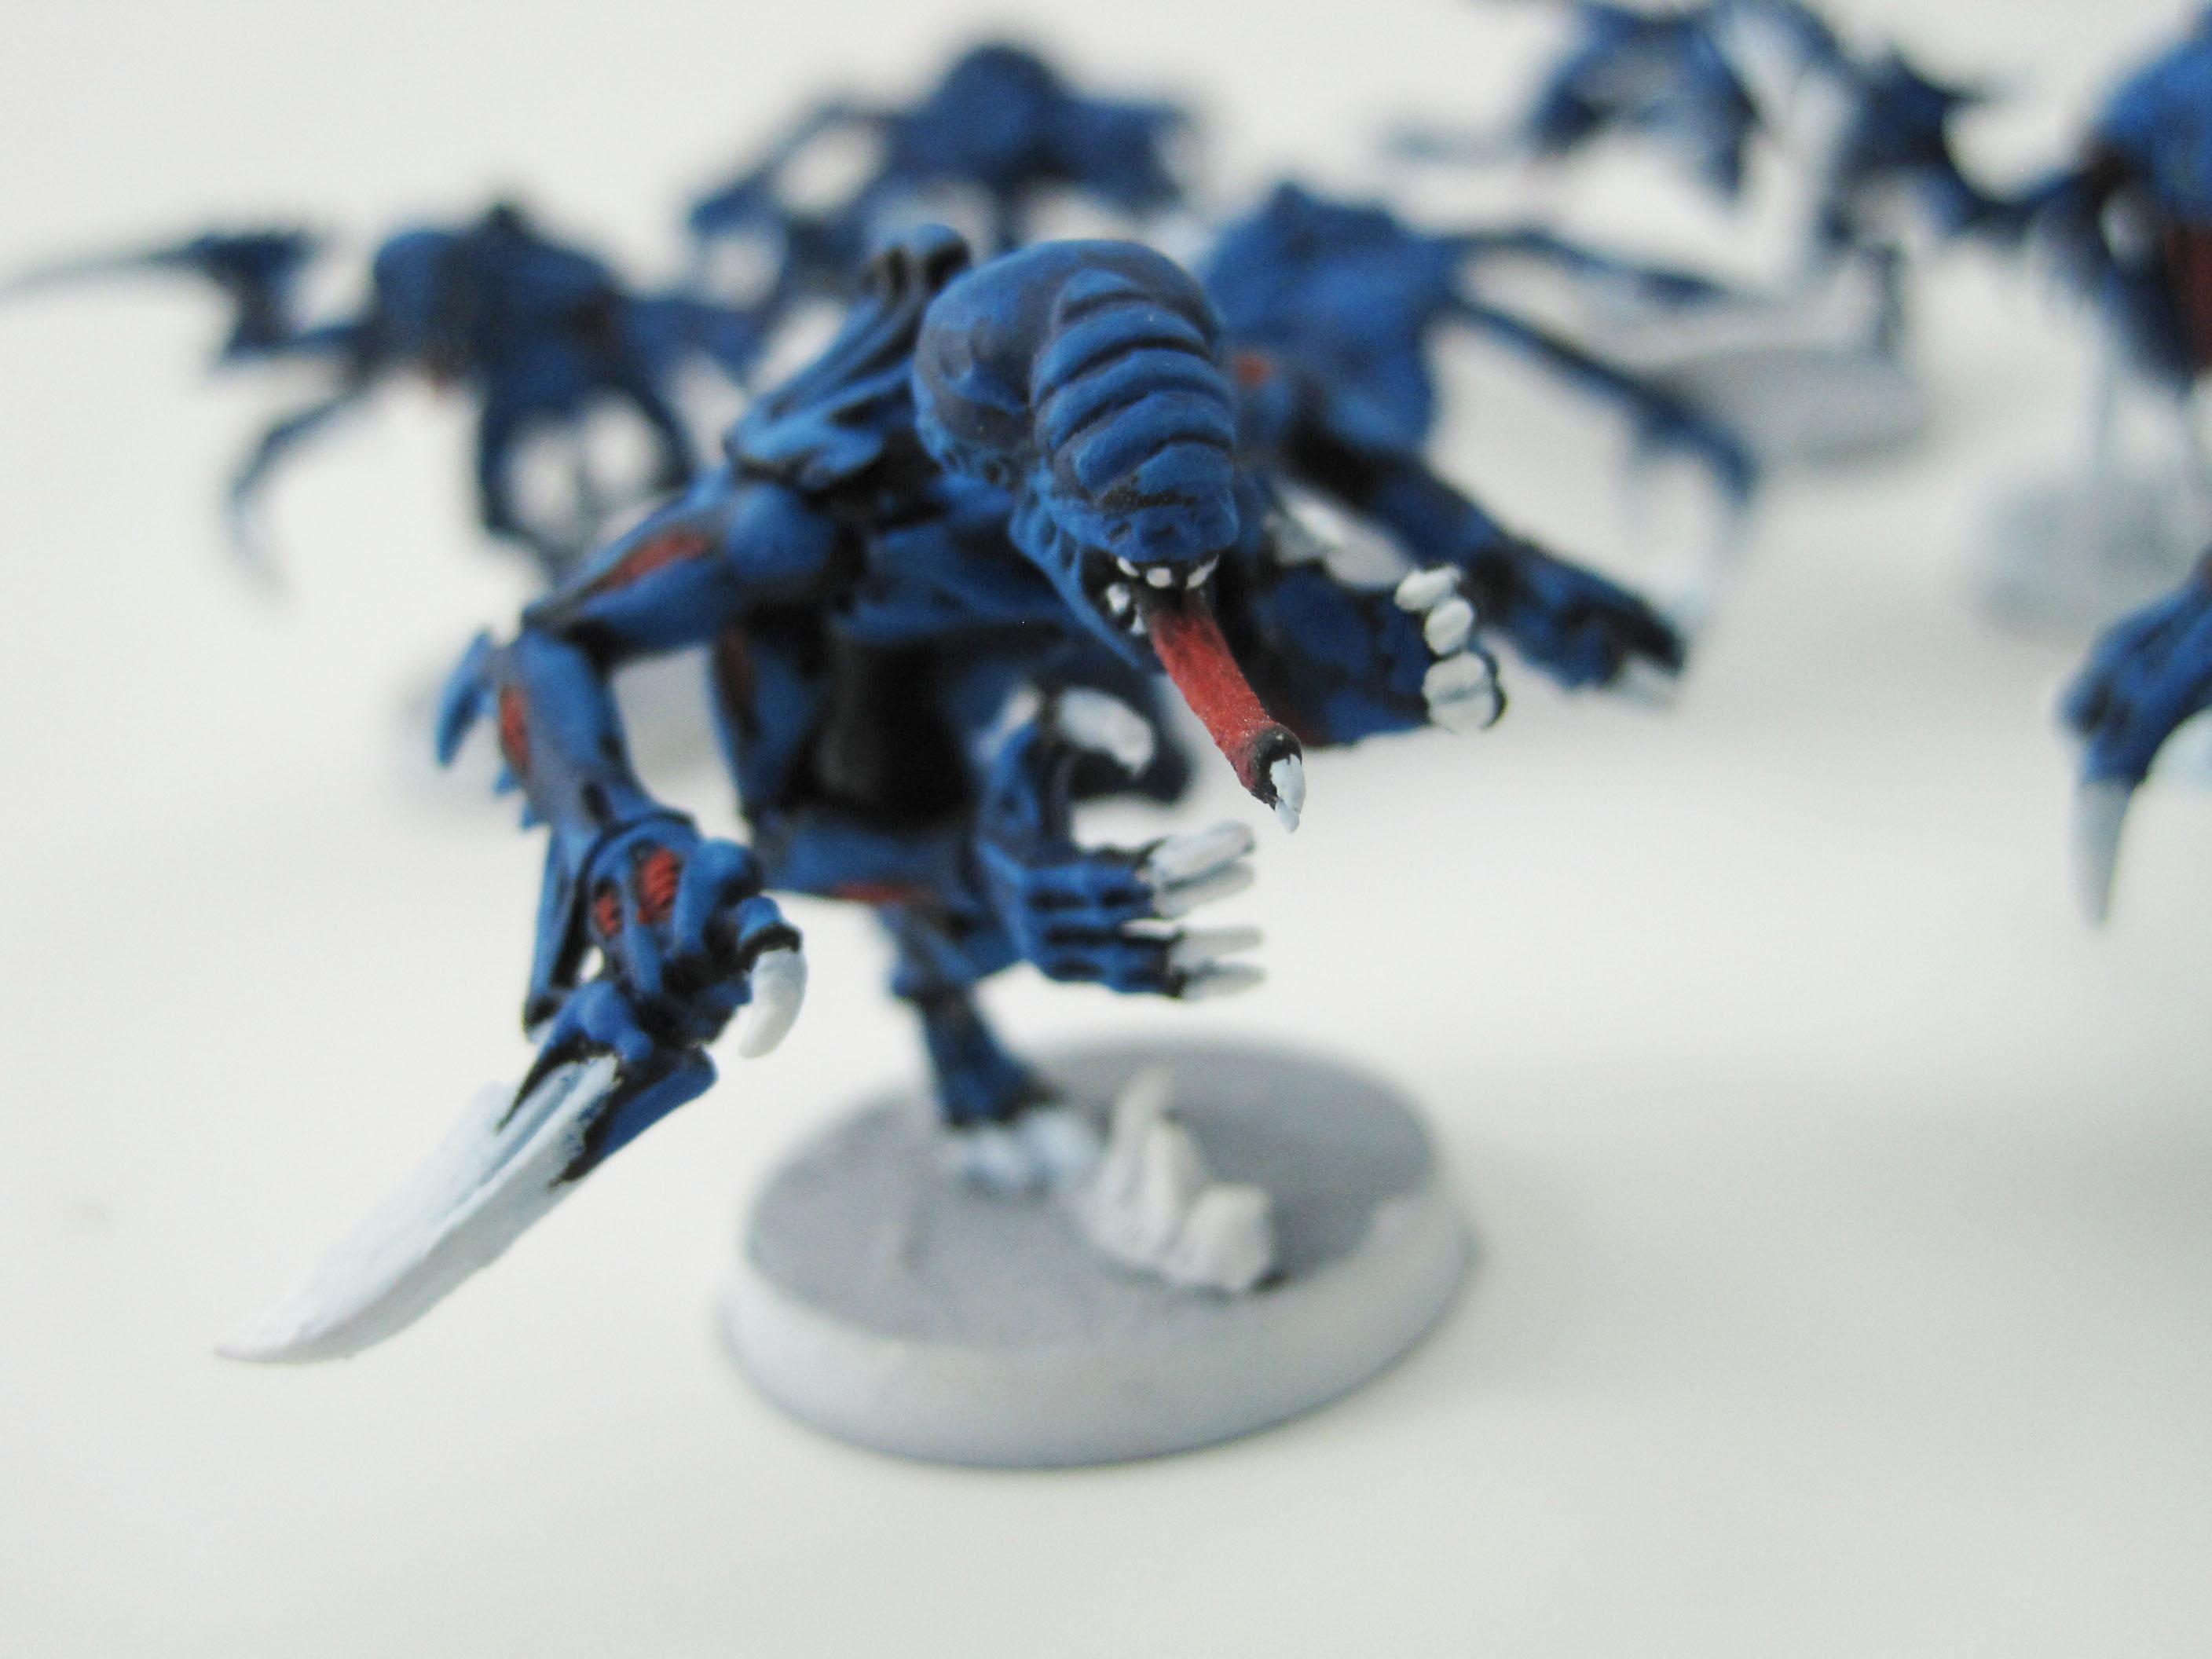 Blue, Genestealer, Implant, Implant Attack, Kyogre, Red Carapace, Red Spots, Spot, Tyranids, White Claws